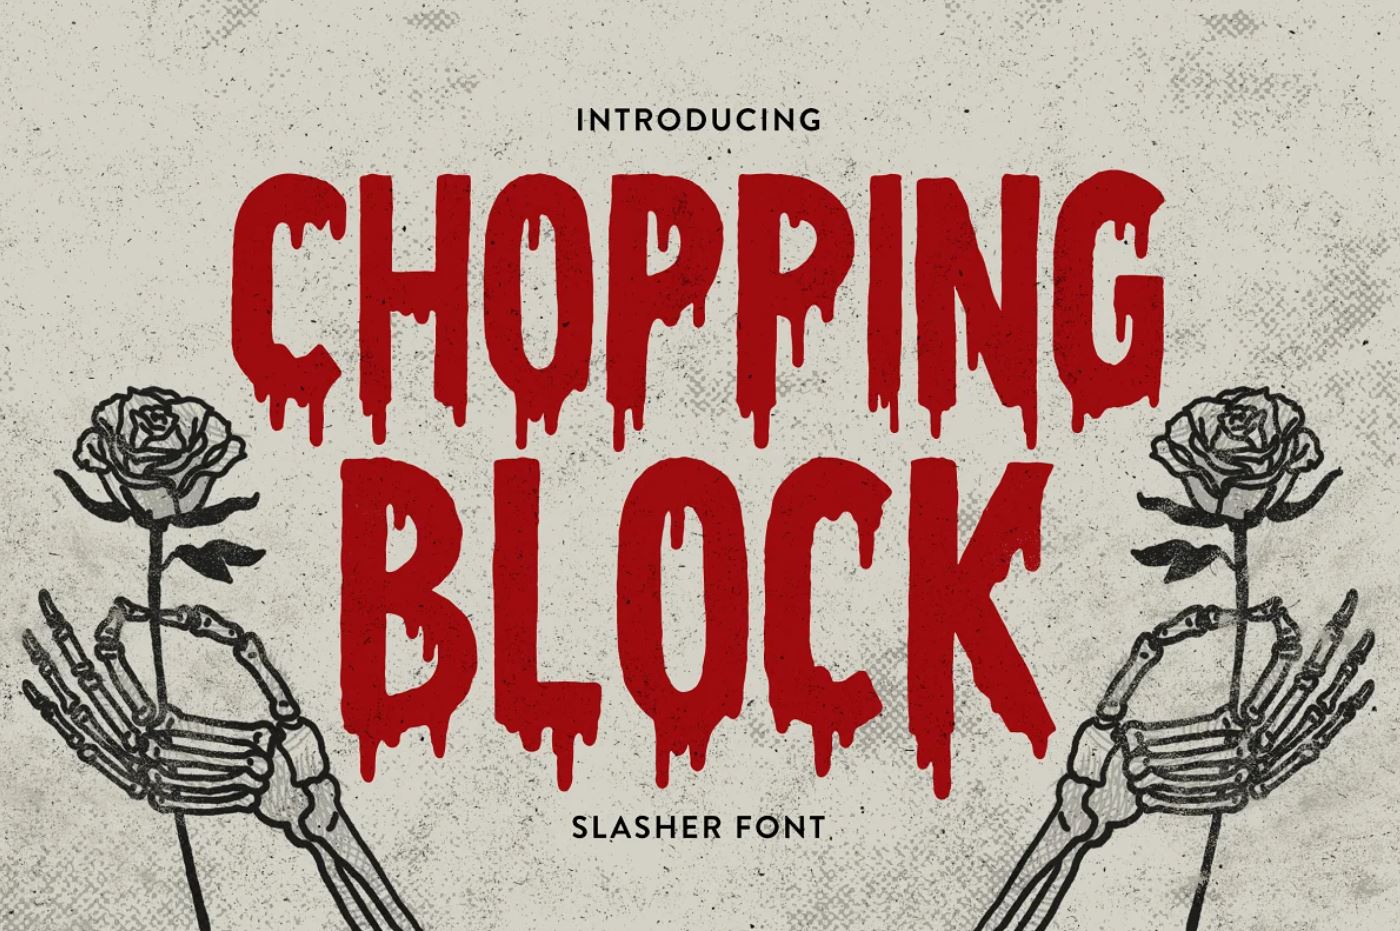 Blood dripping style font for horror movie titles